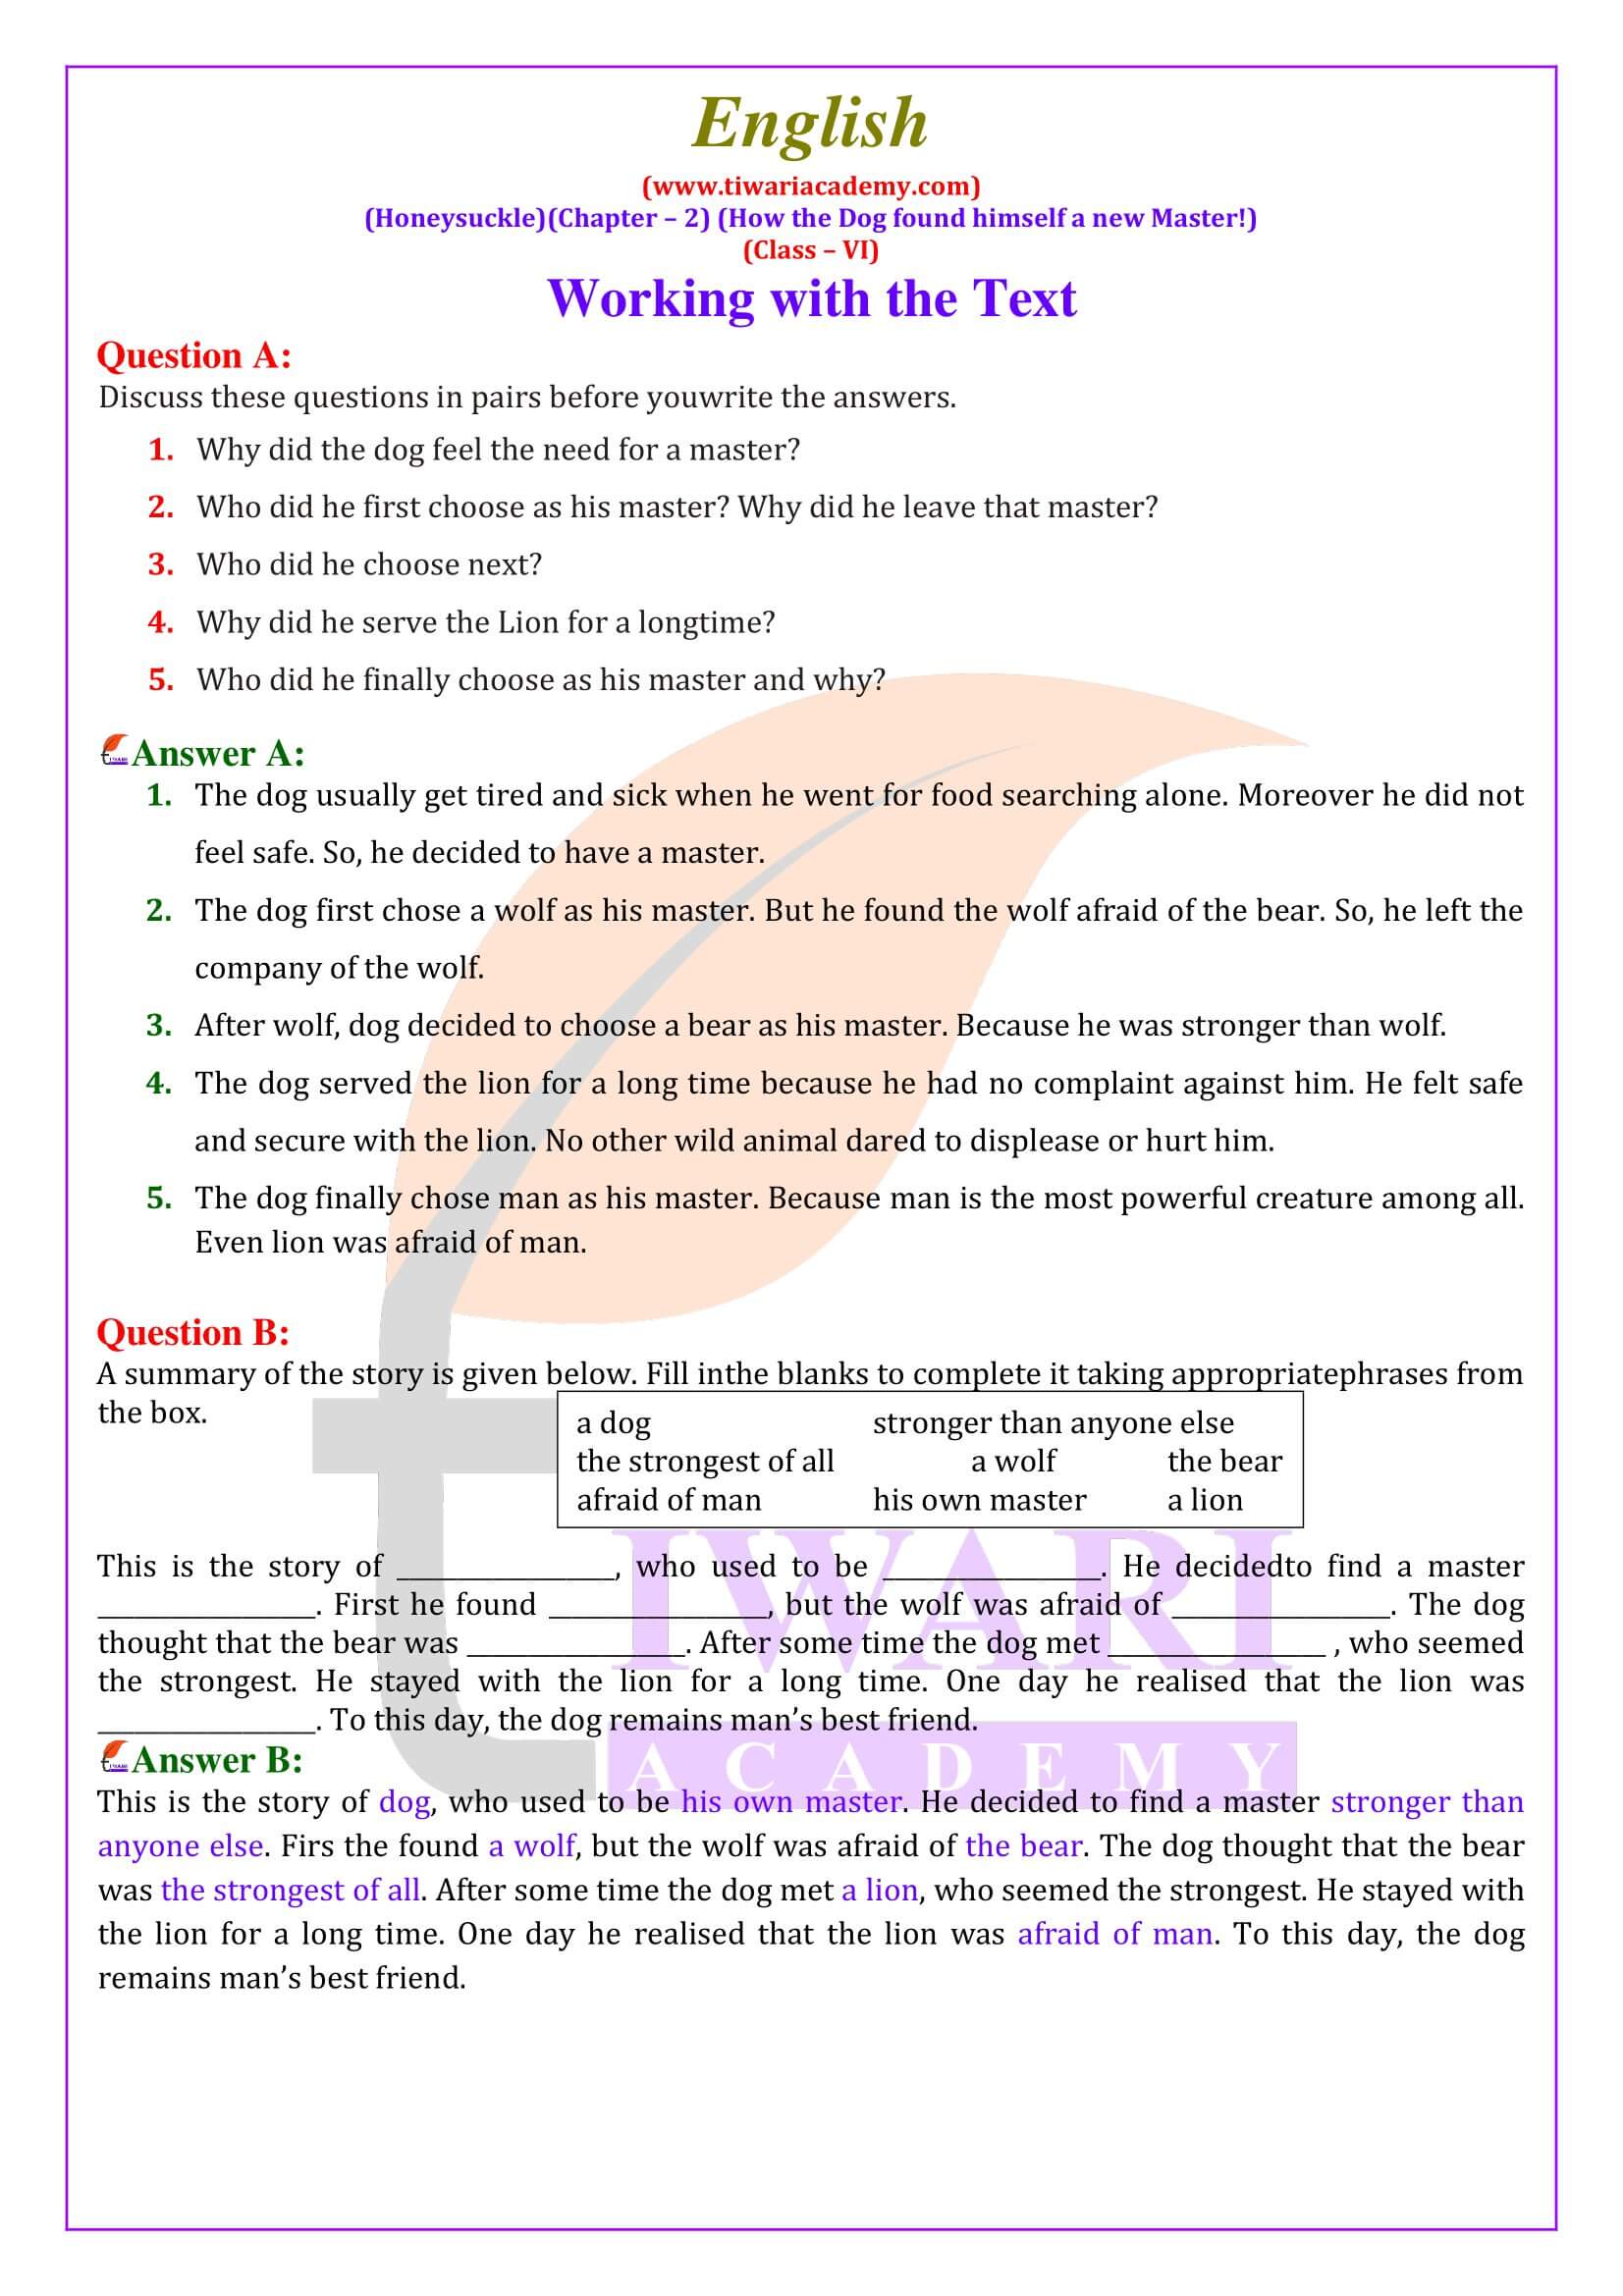 NCERT Solutions for Class 6 English Honeysuckle Chapter 2 How the Dog Found Himself a New Master